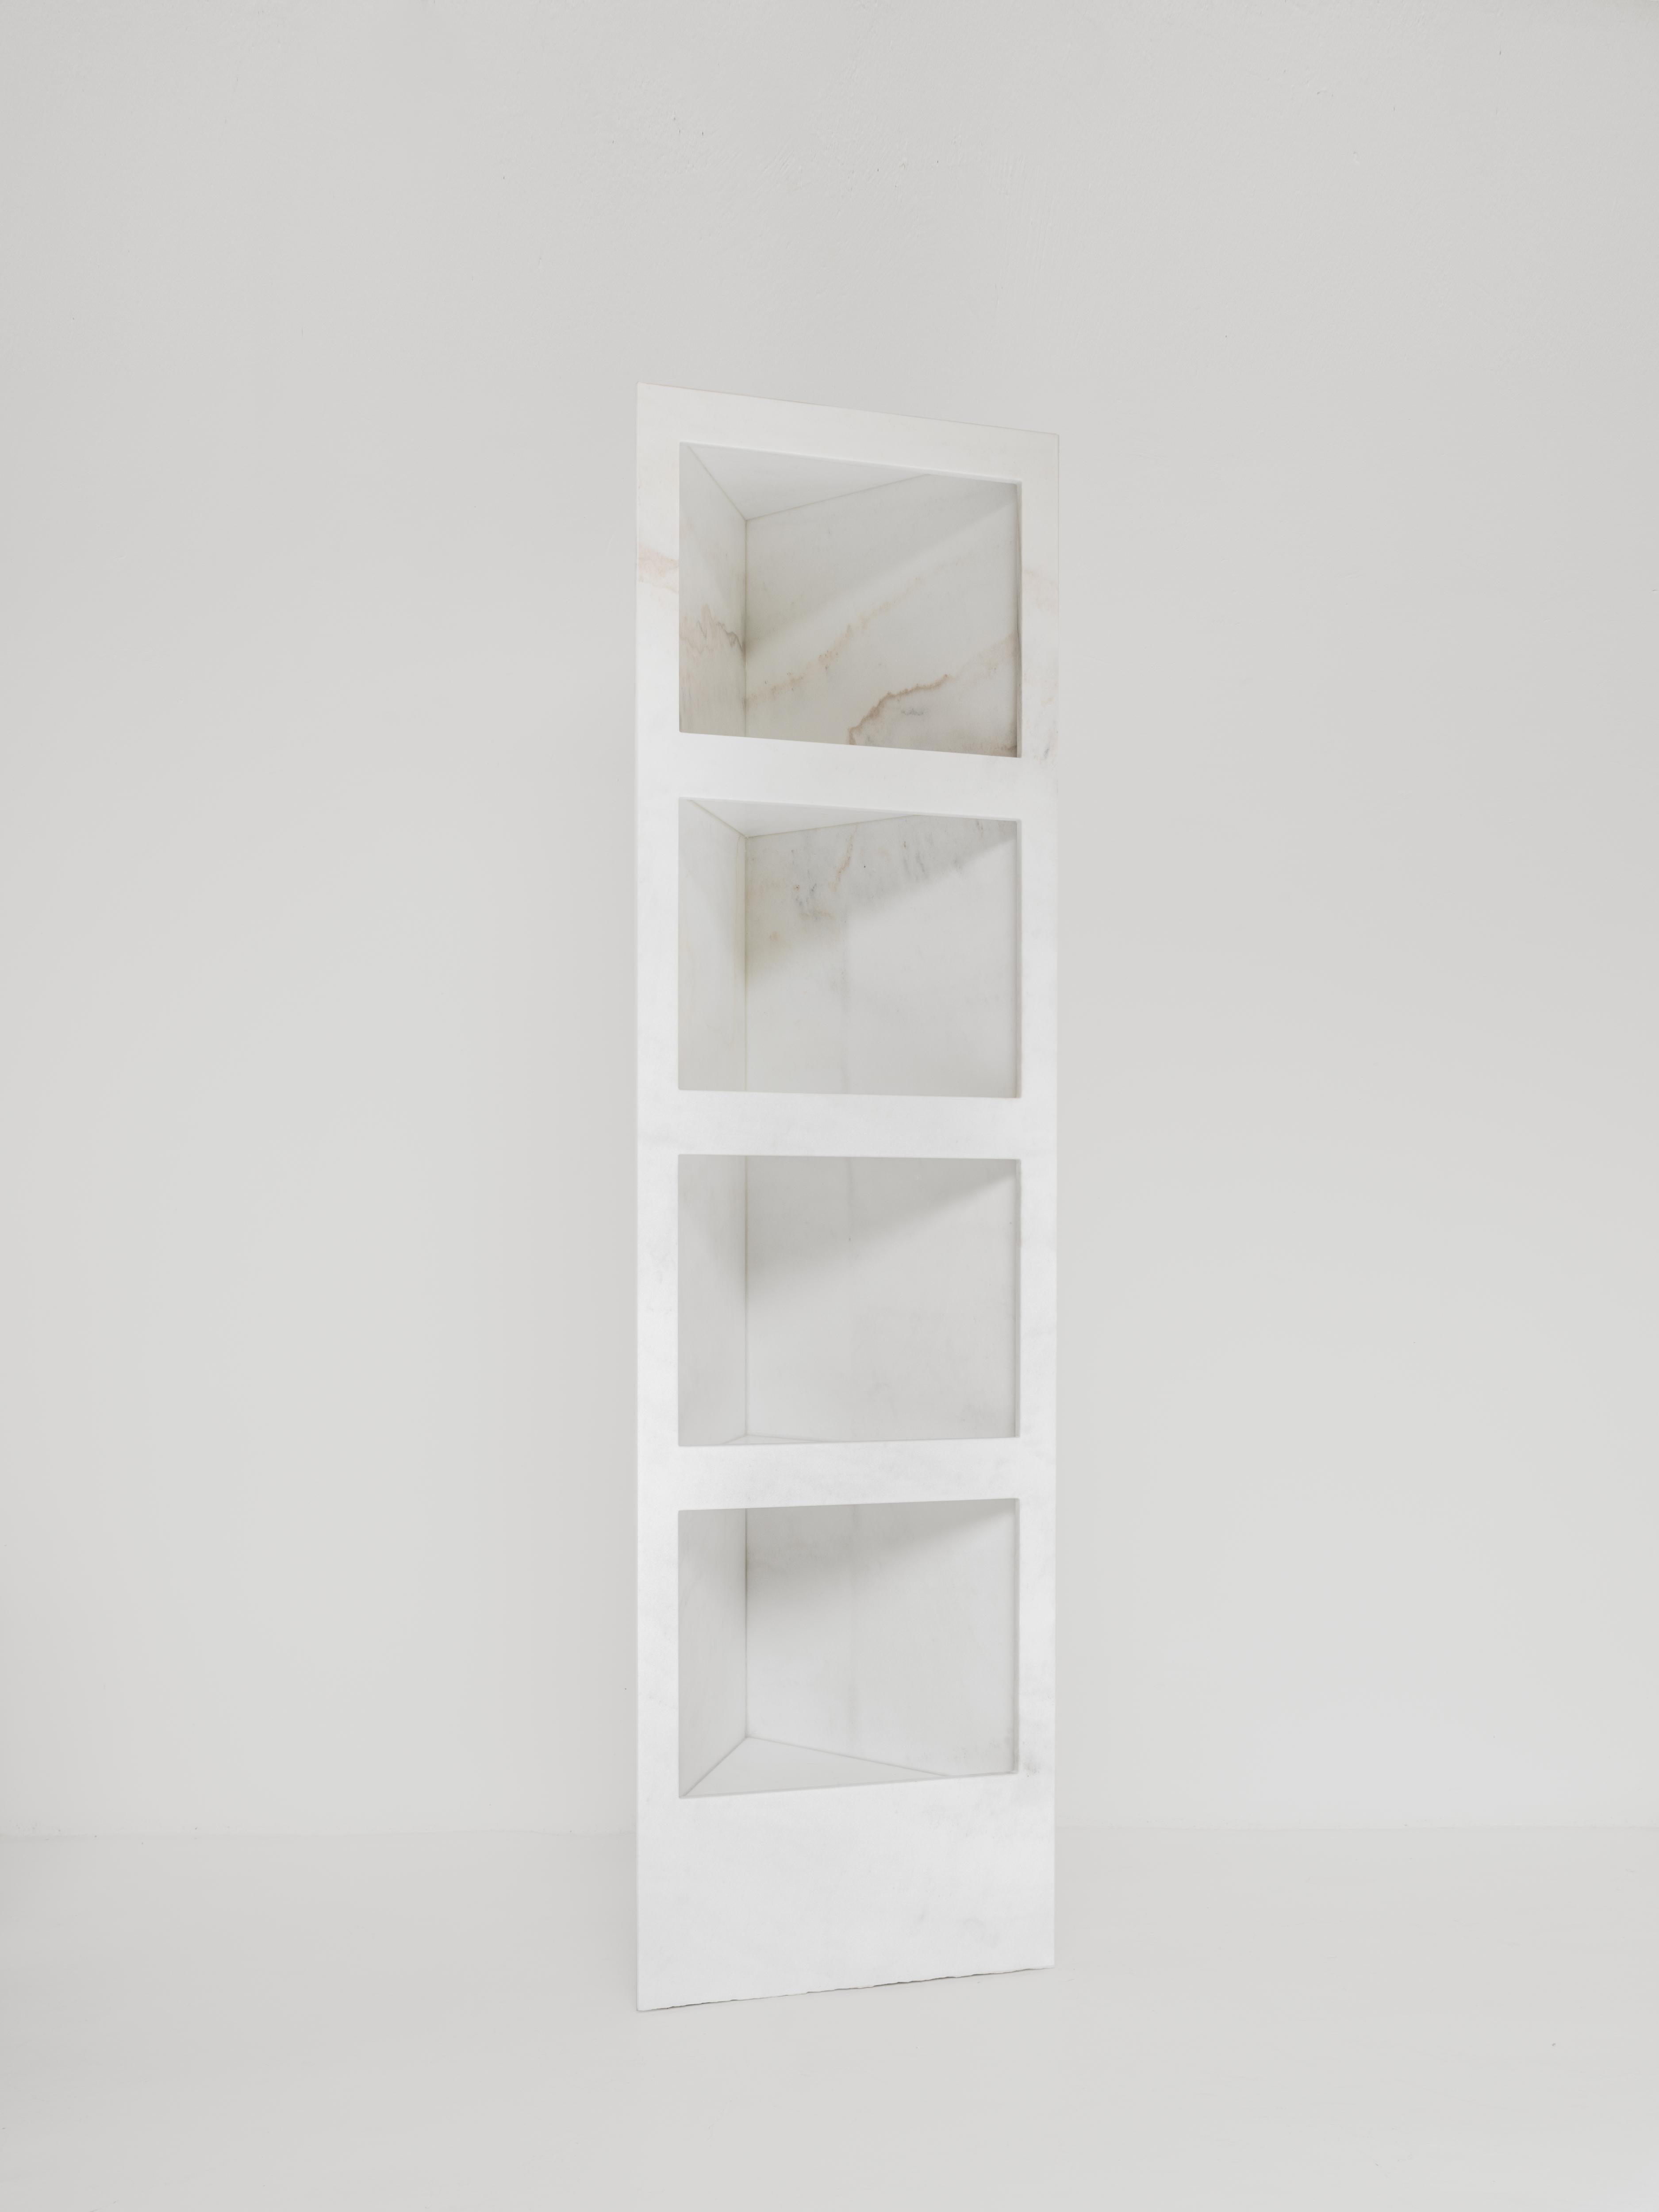 Sam Chermayeff
Shelf
From the series “Concept Kitchen”
Produced in exclusive for SIDE GALLERY
Manufactured by Bagnara
Italy, 2020
Bianco Lasa marble
Contemporary Design

Measurements
60 cm x 60 cm x 210H cm
23,6 in x 23,6 in x 82,7H